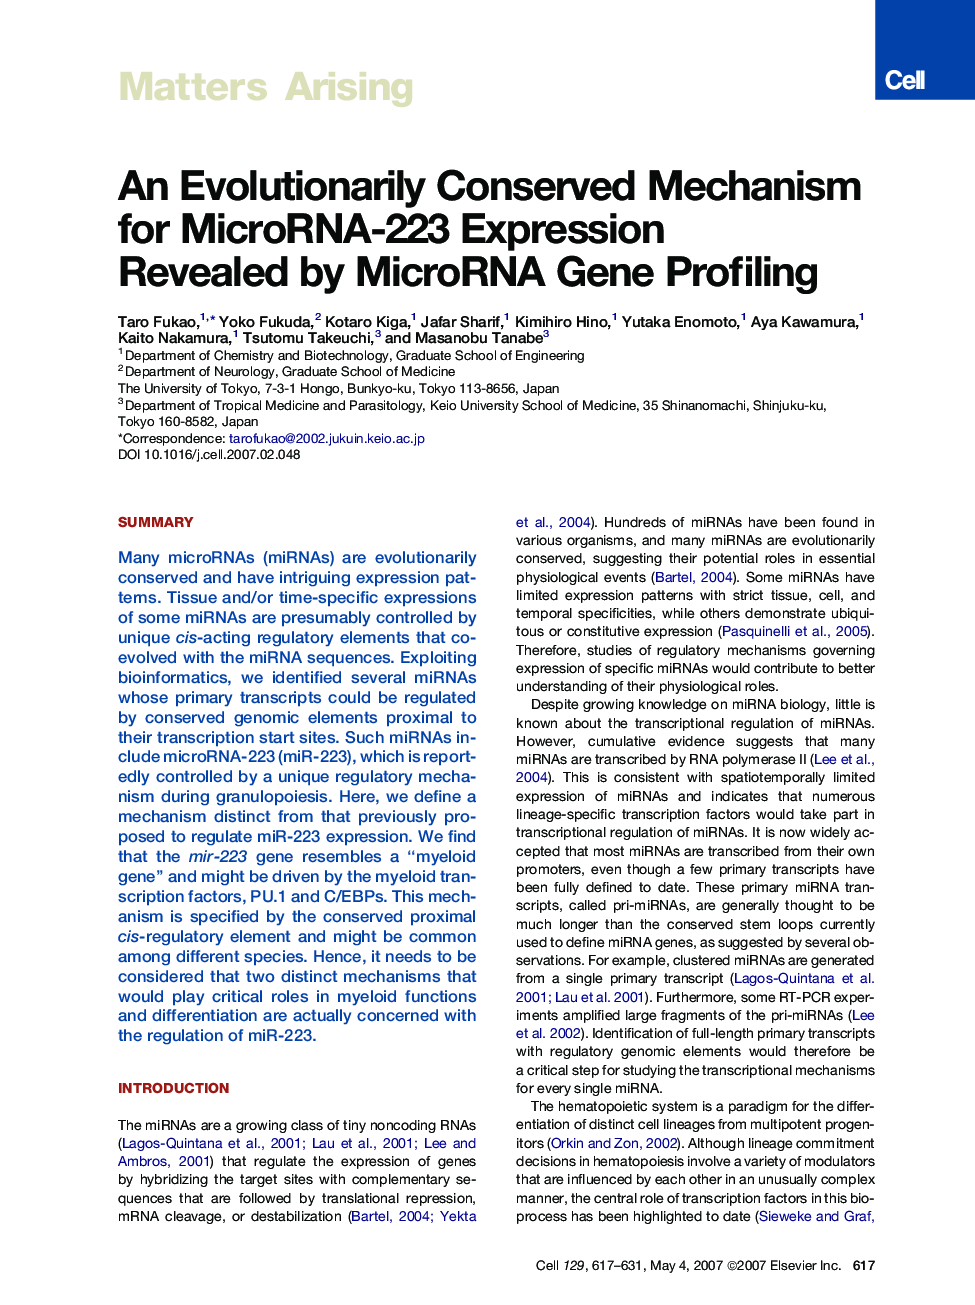 An Evolutionarily Conserved Mechanism for MicroRNA-223 Expression Revealed by MicroRNA Gene Profiling